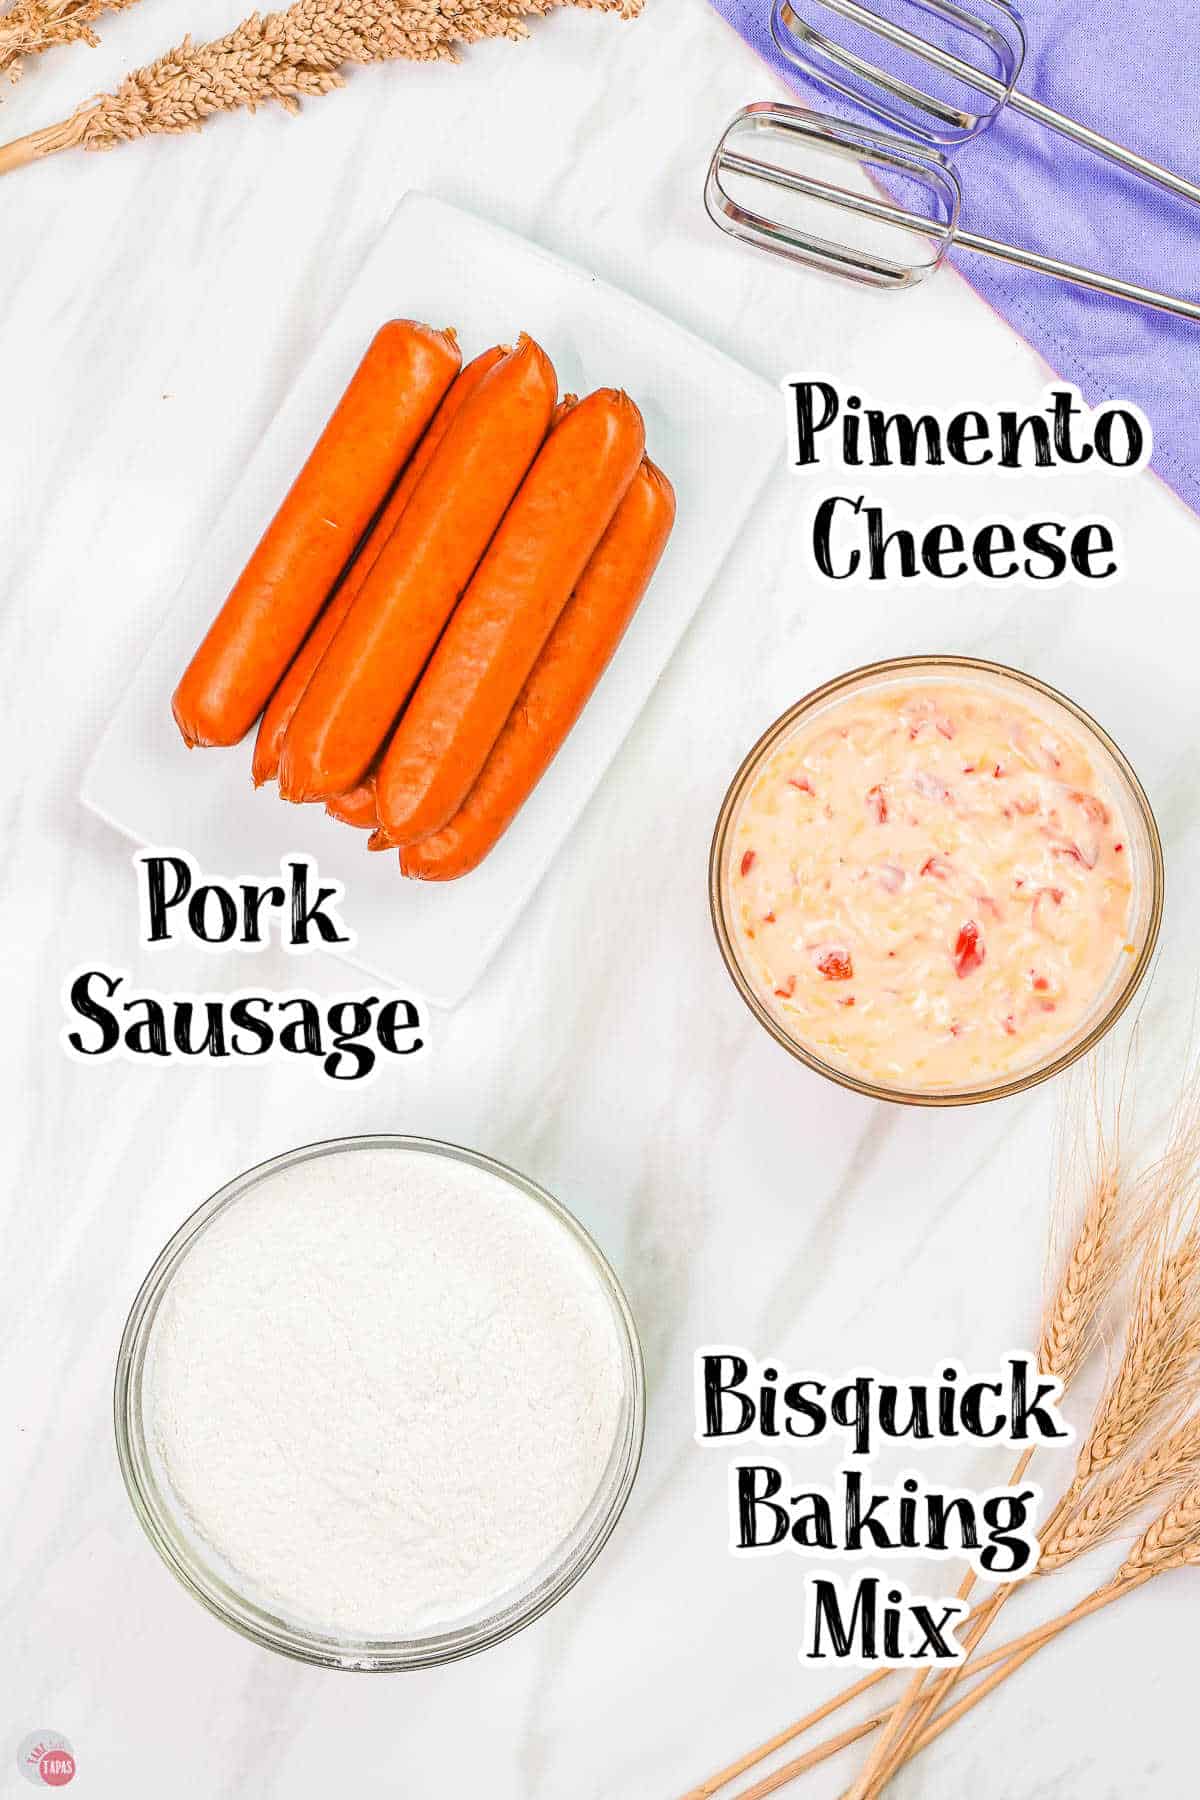 new recipe with 2 cups bisquick, ground sausage, and pawleys island cheese